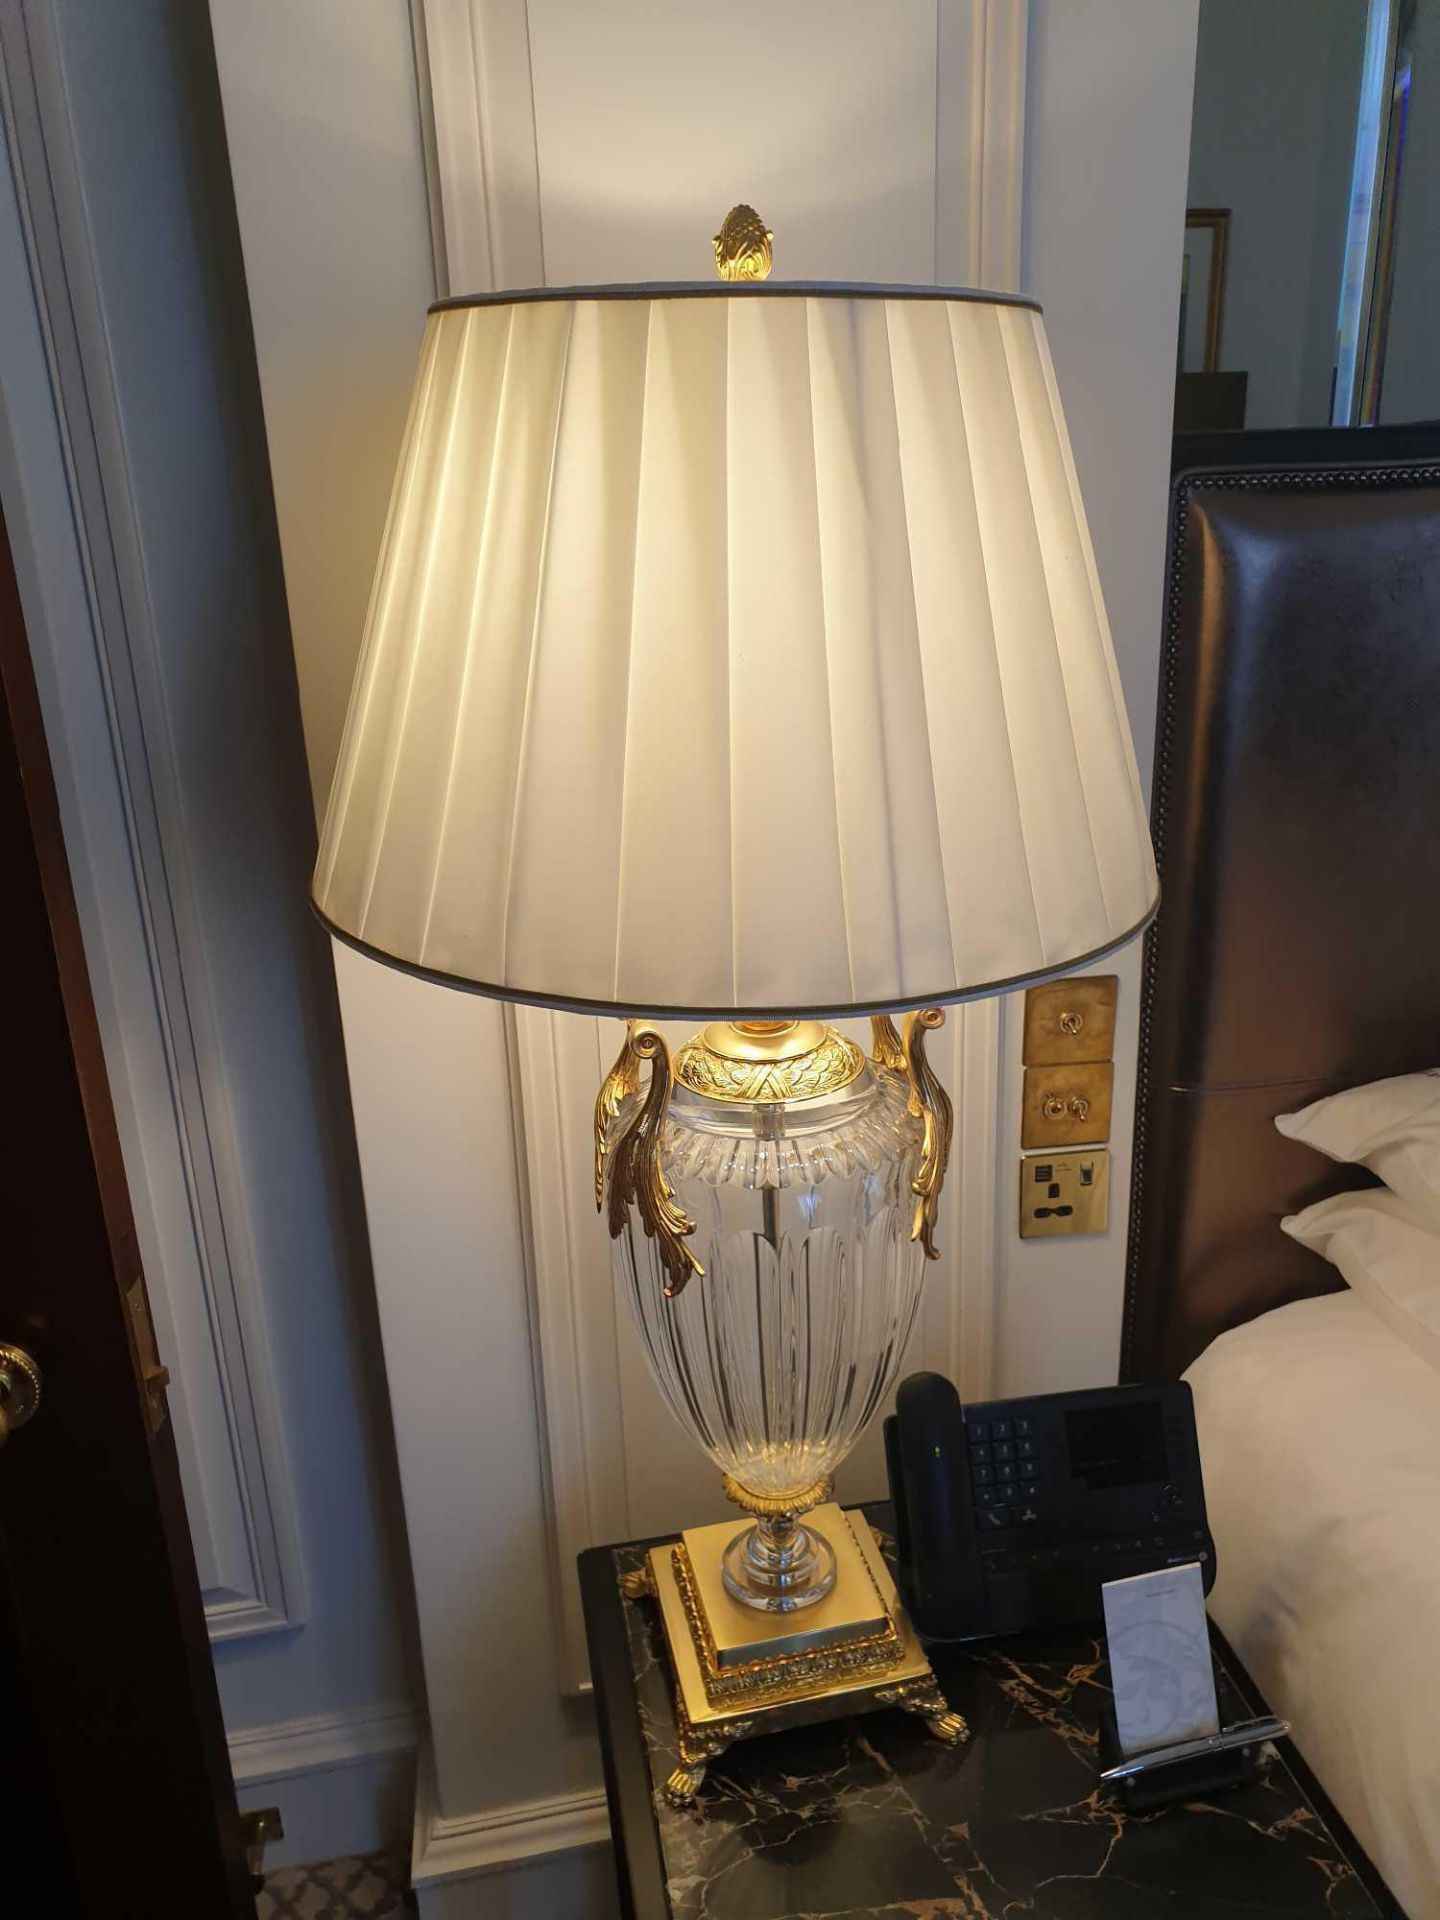 A Pair Of Laudarte Crystal Table Lamps Inserts And Decorations In 24ct Gold With Shade 95cm Tall ( - Image 3 of 3